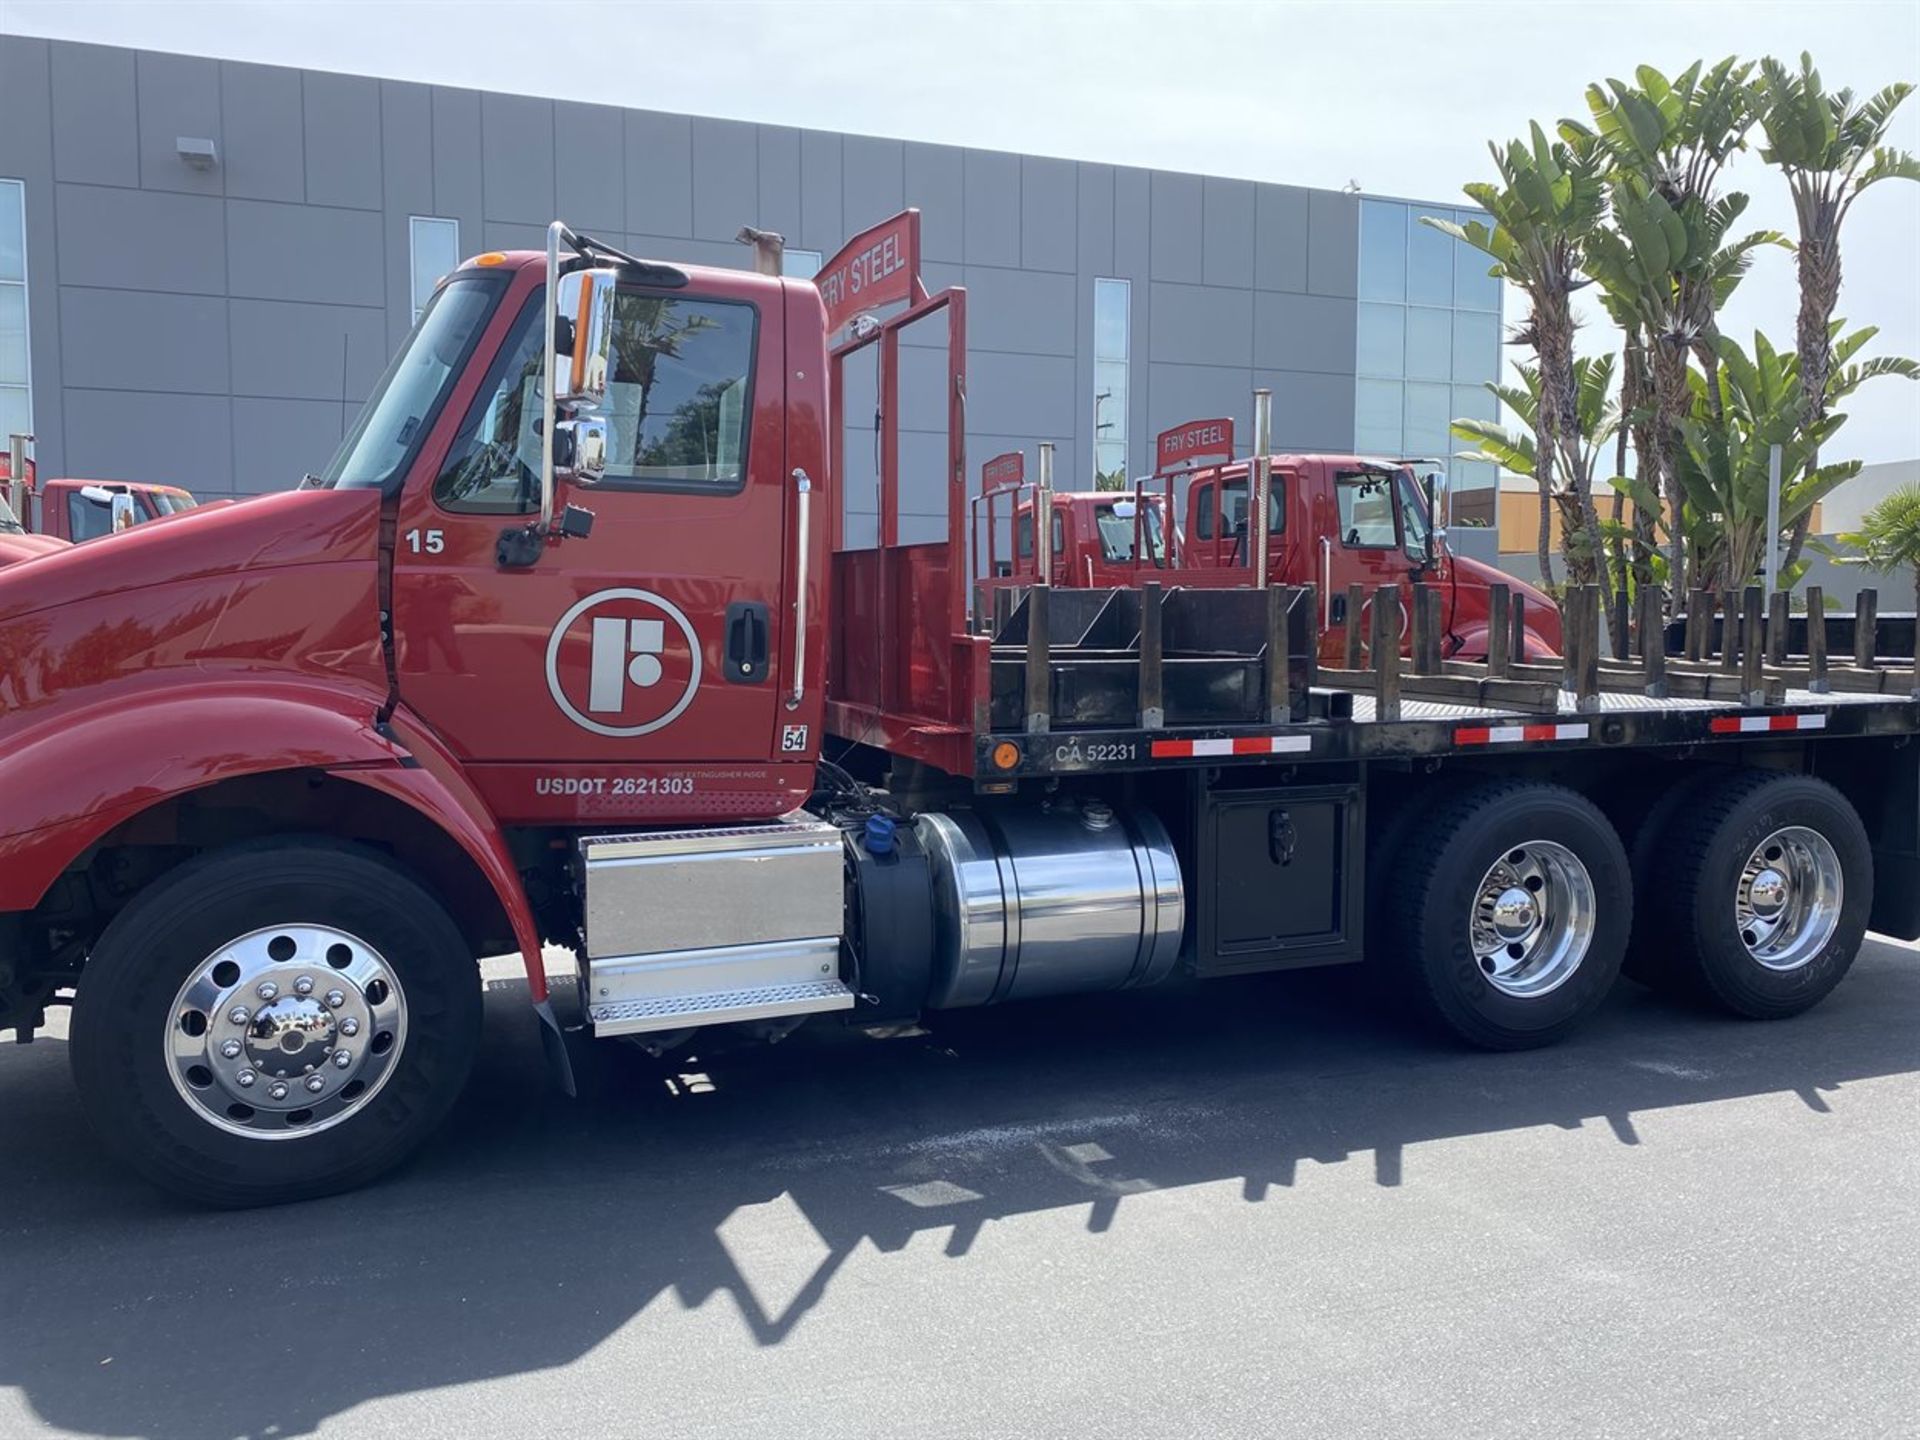 2016 INTERNATIONAL 18' Stake Bed Truck, VIN 1HTHXSNR4GH132503, 129,562 Miles at time of inspection - Image 3 of 21